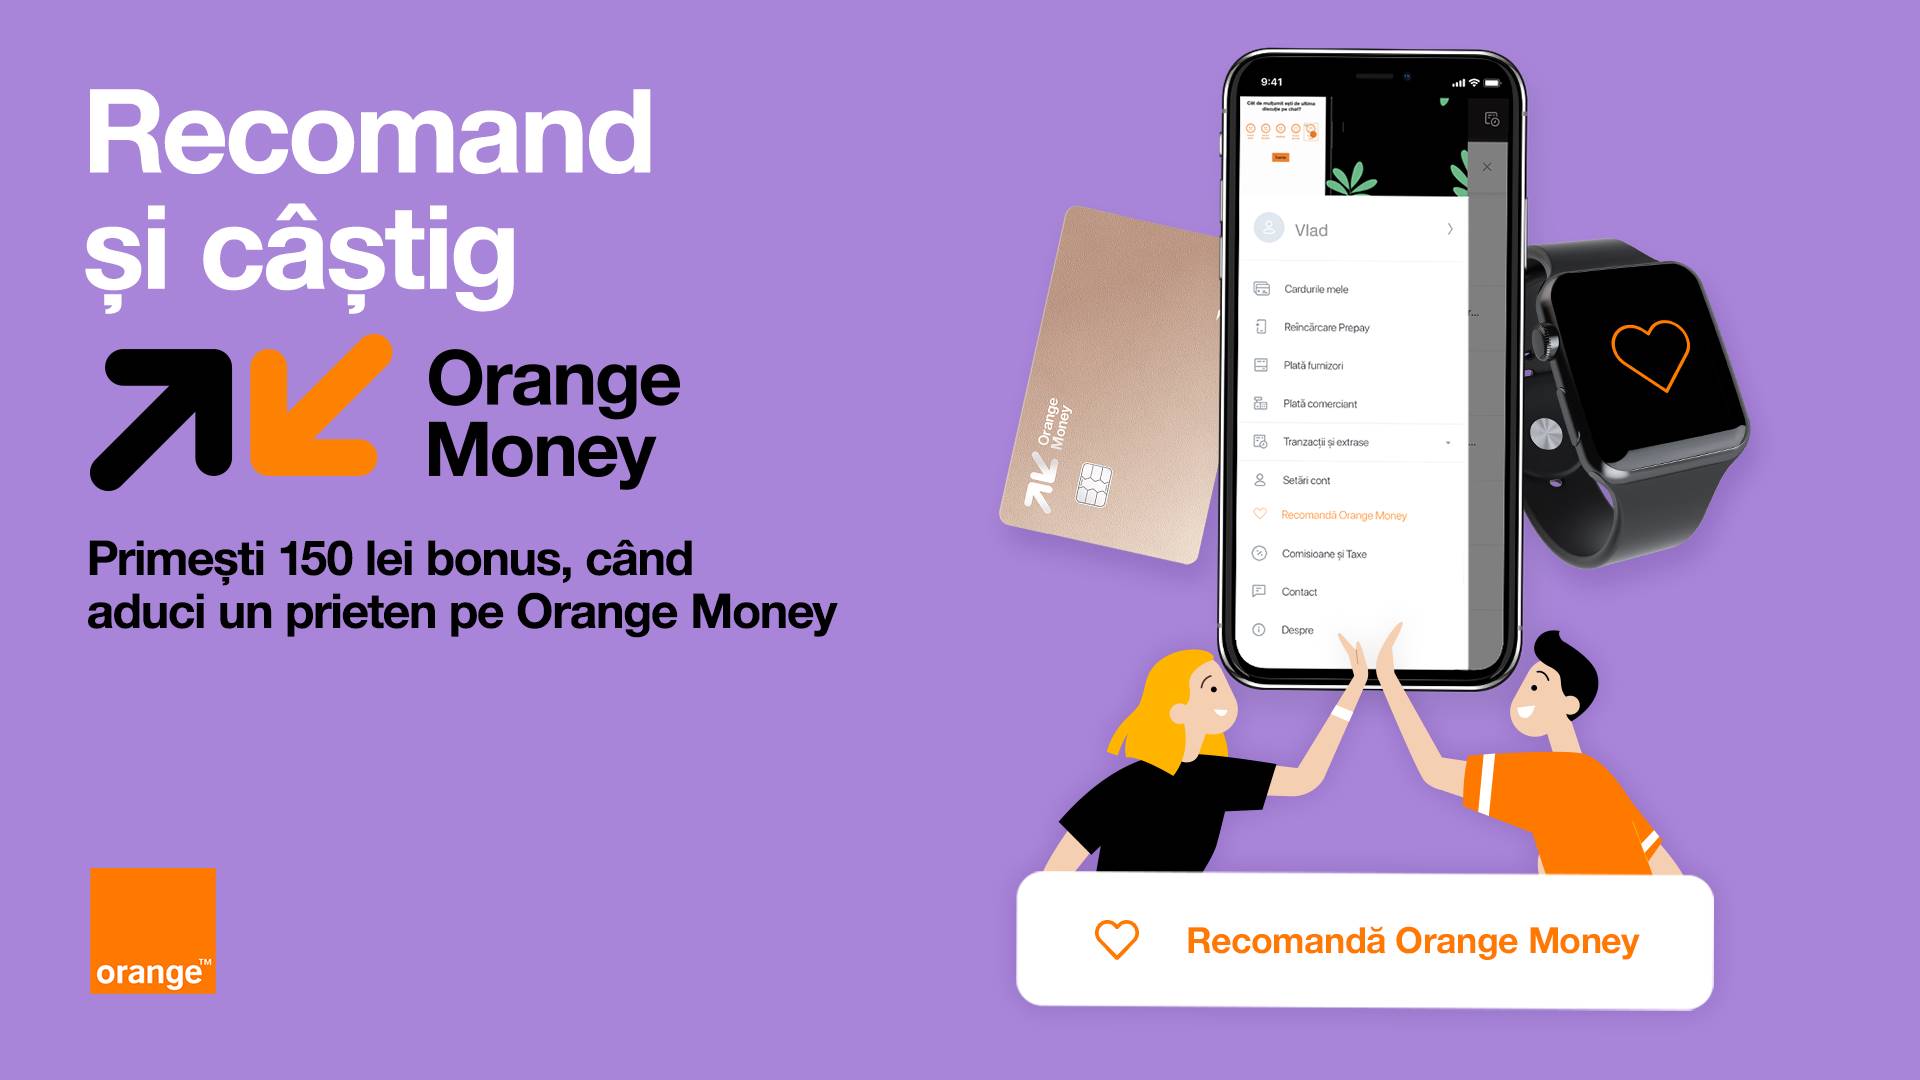 Orange's Official Announcement, how much money does it give FREE referrals to Romanian customers